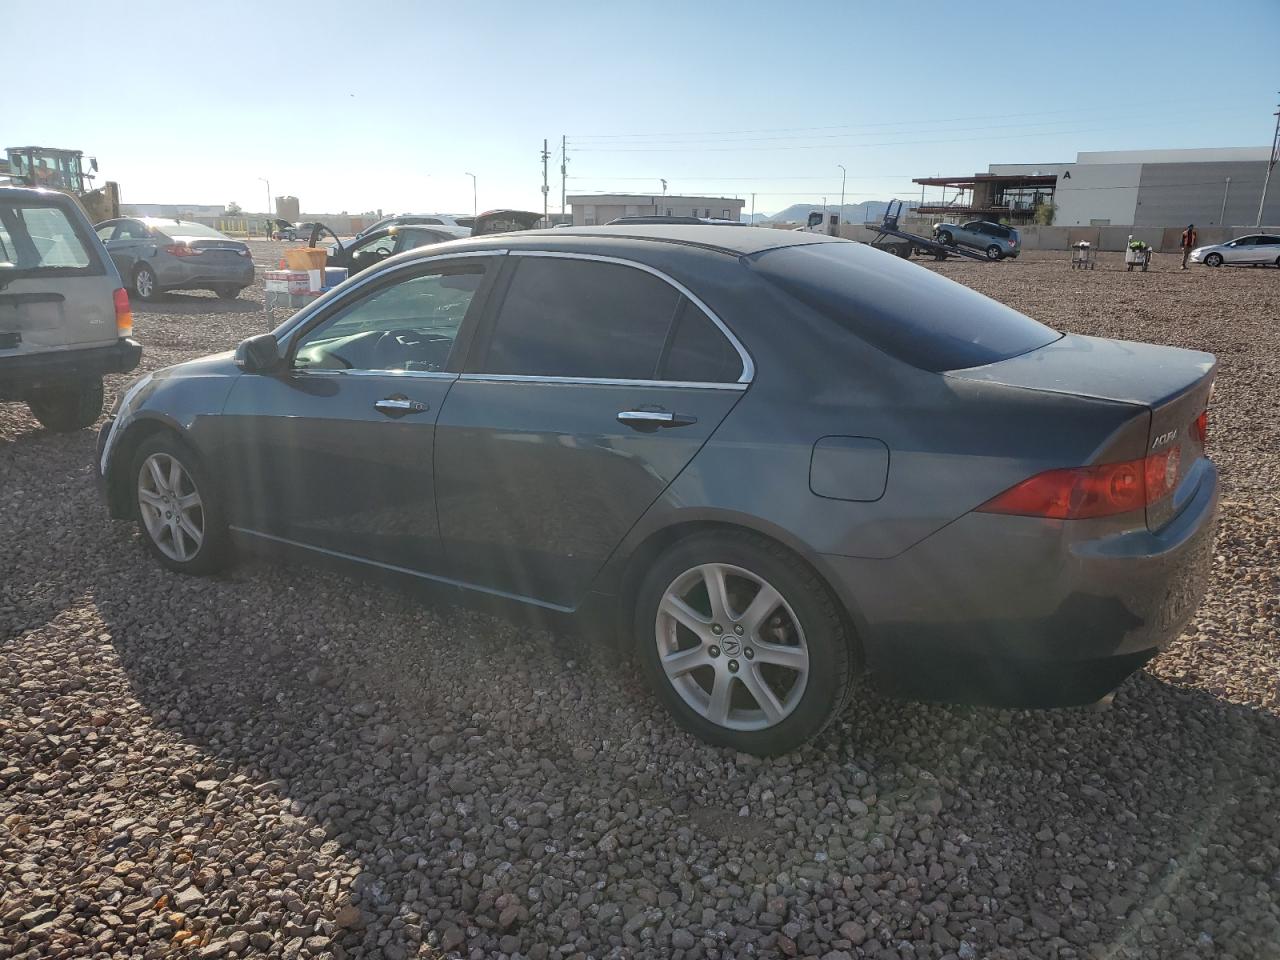 JH4CL96804C029524  - ACURA TSX  2004 IMG - 1